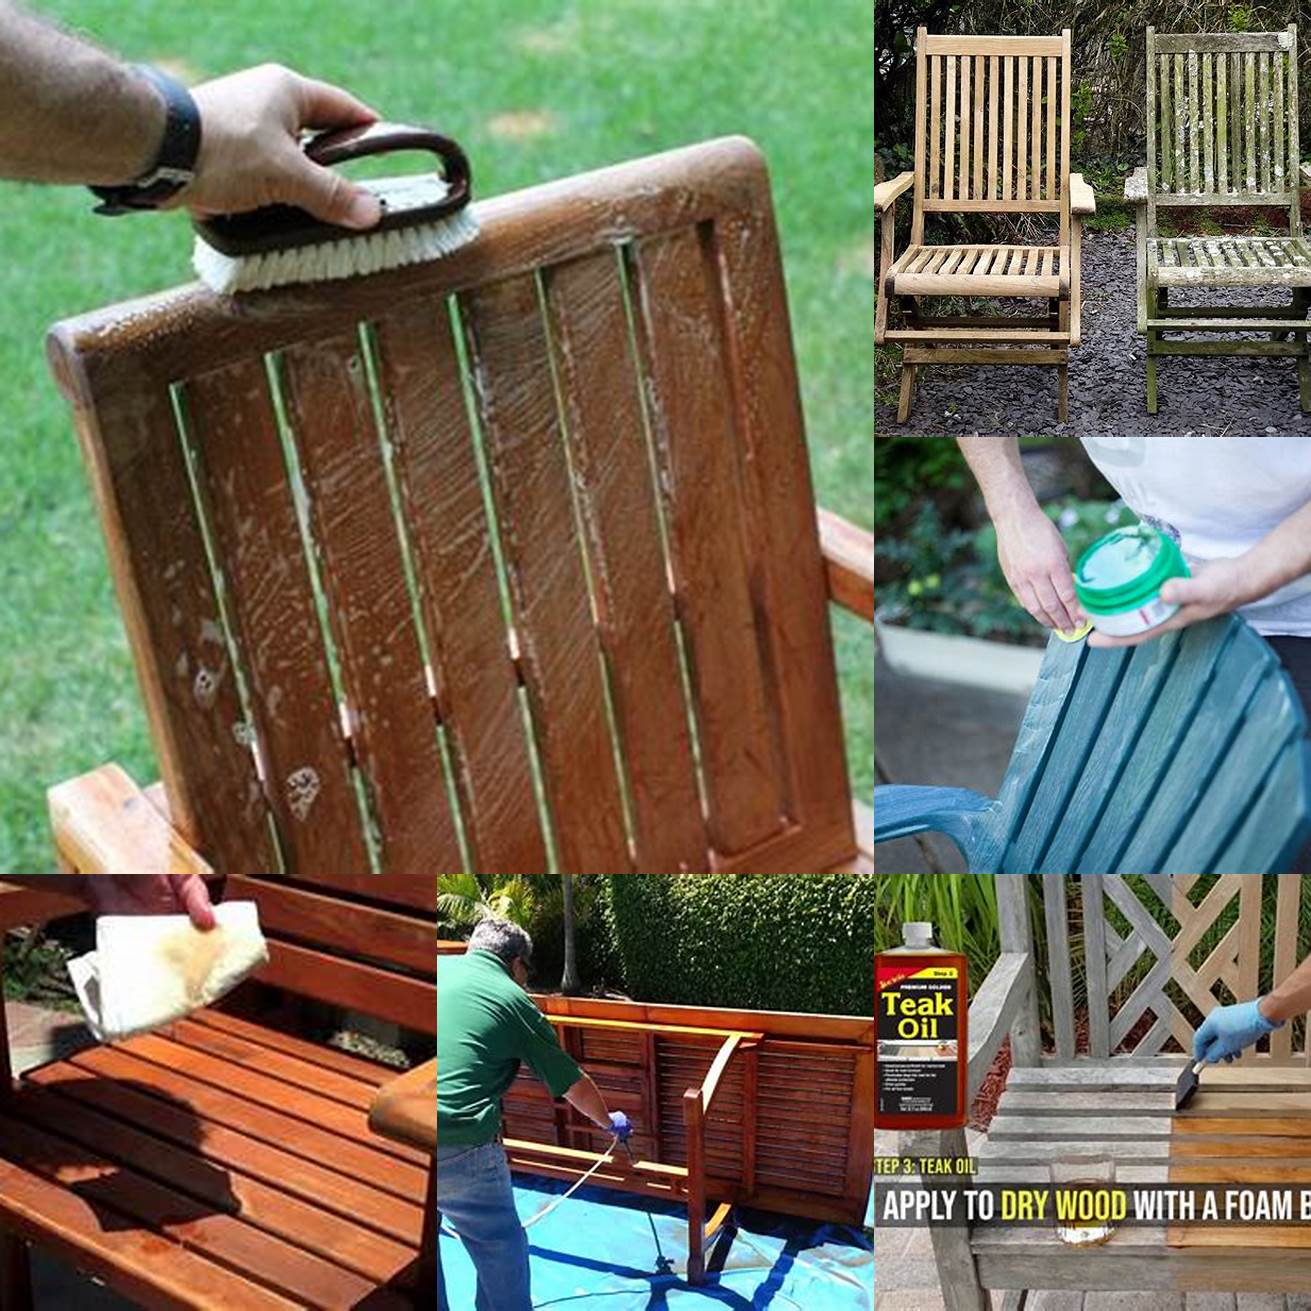 A picture of someone cleaning teak outdoor furniture